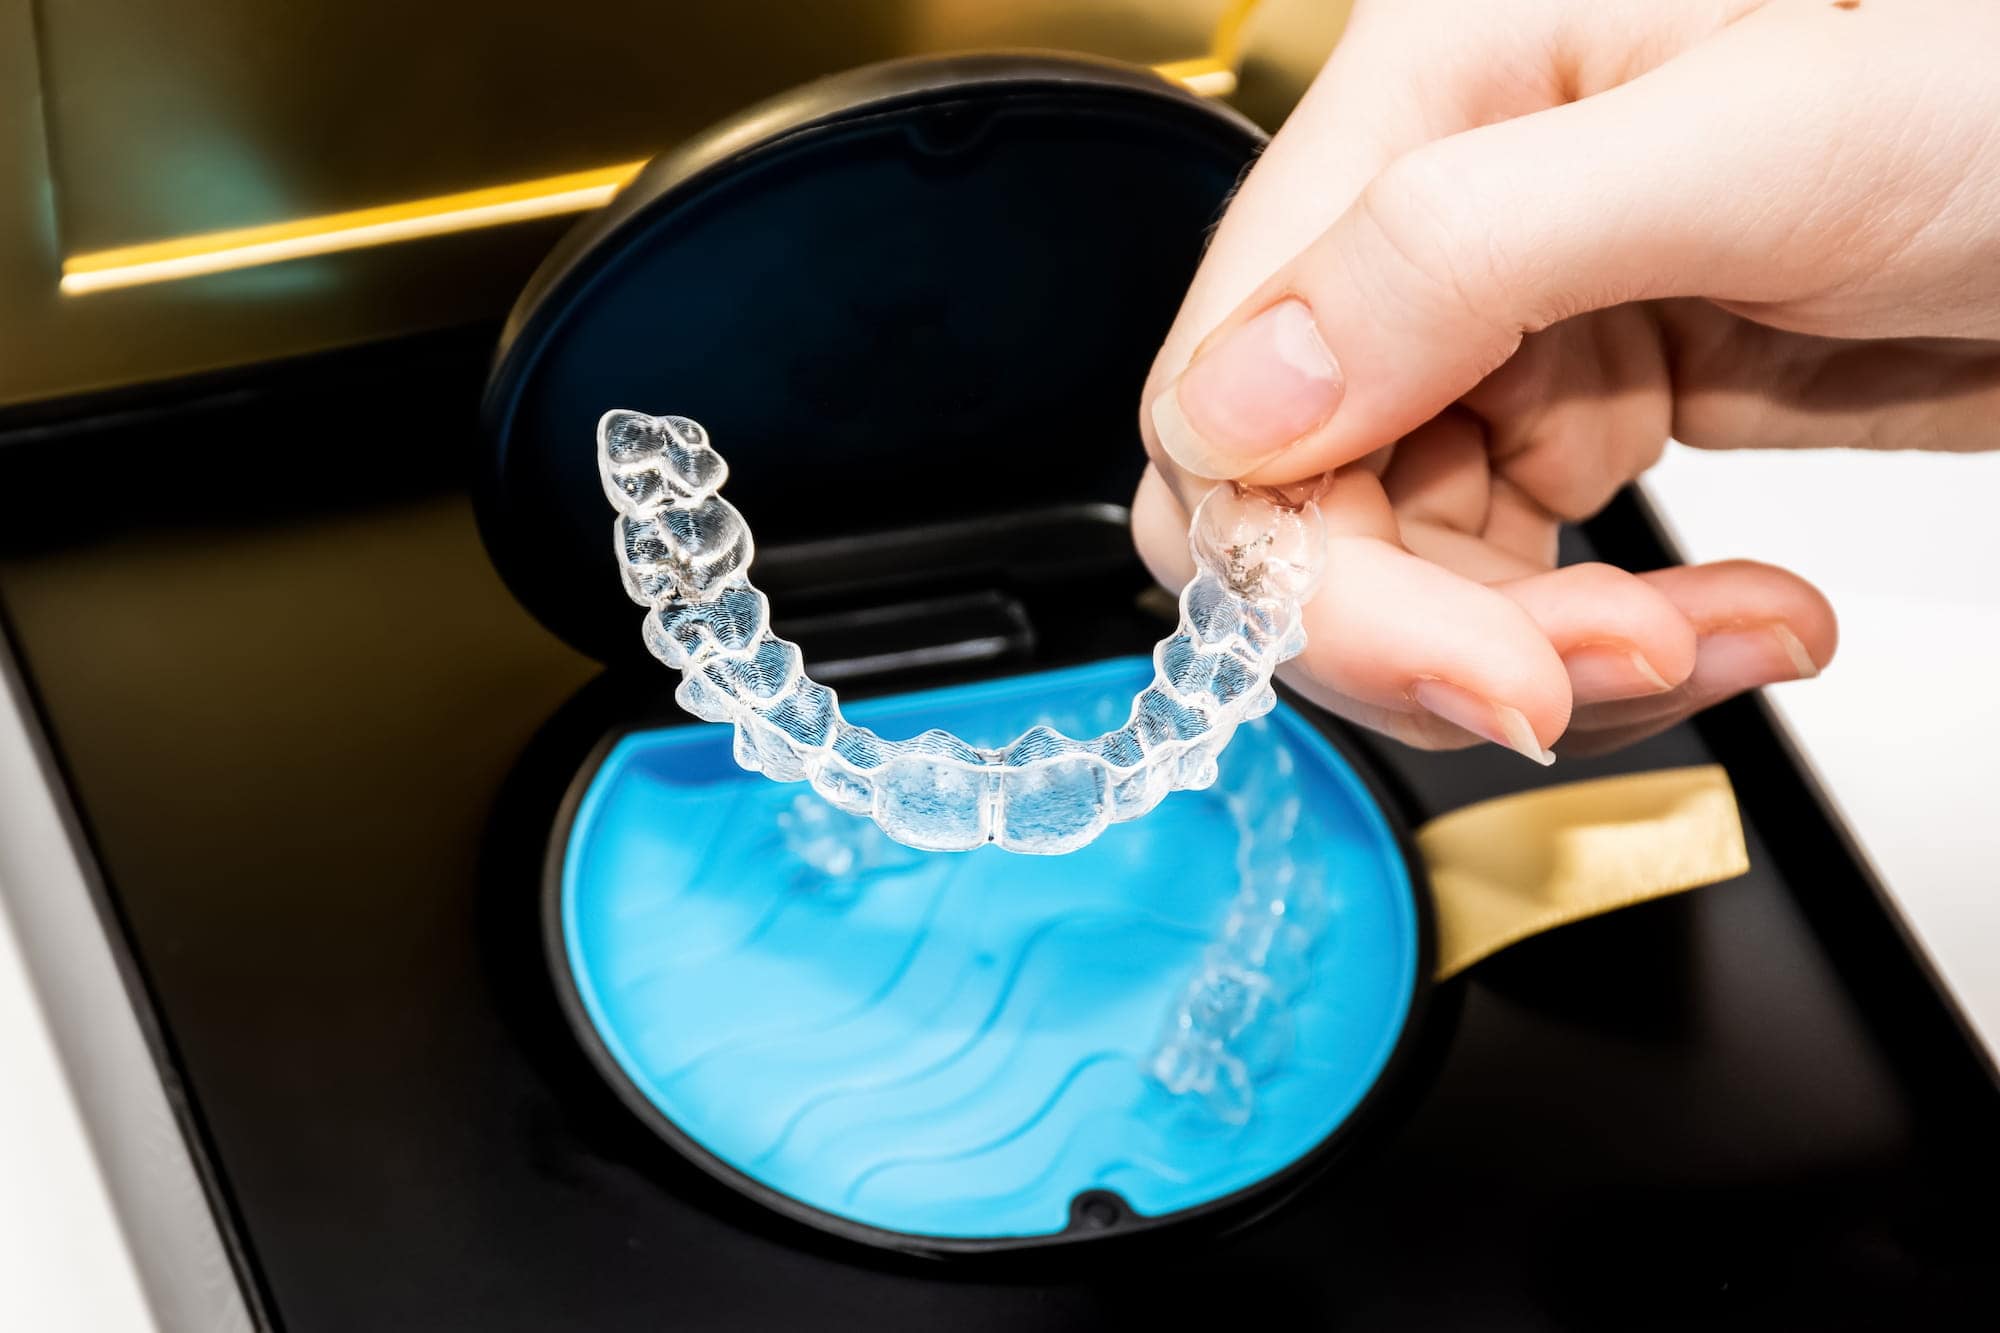 A person holds up an Invisalign retainer in its case.